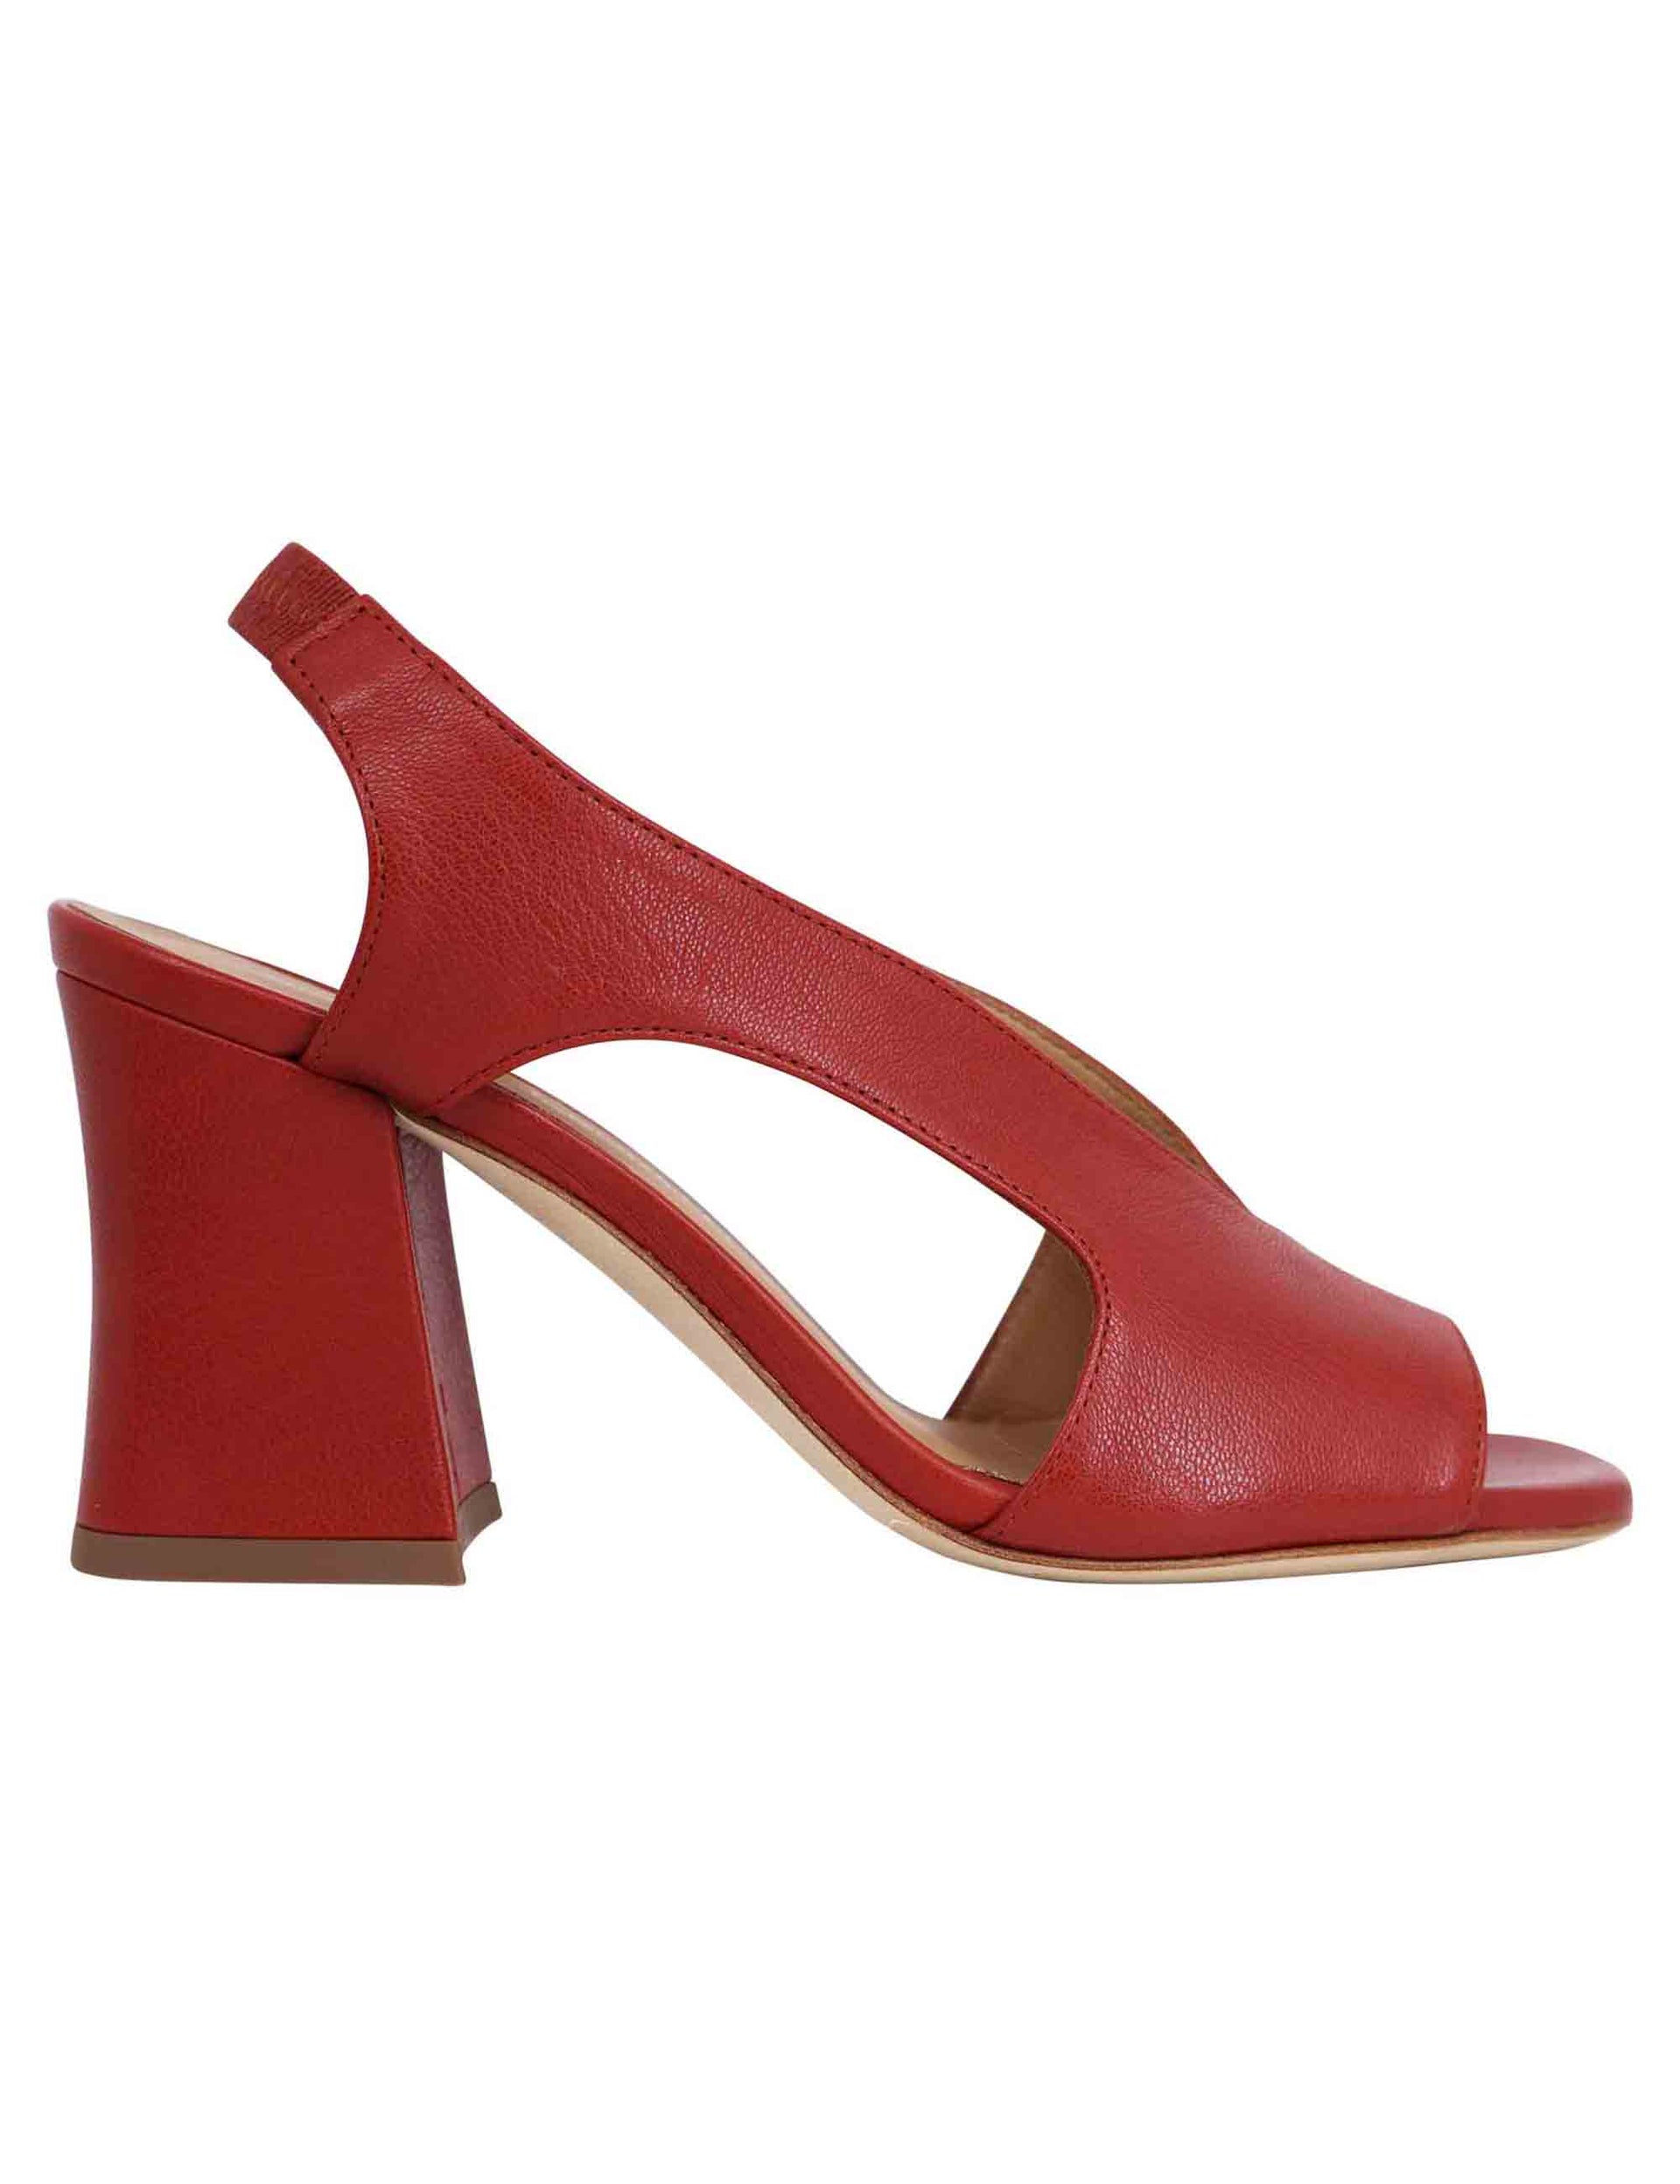 Women's slingback sandals in brick leather with high heel